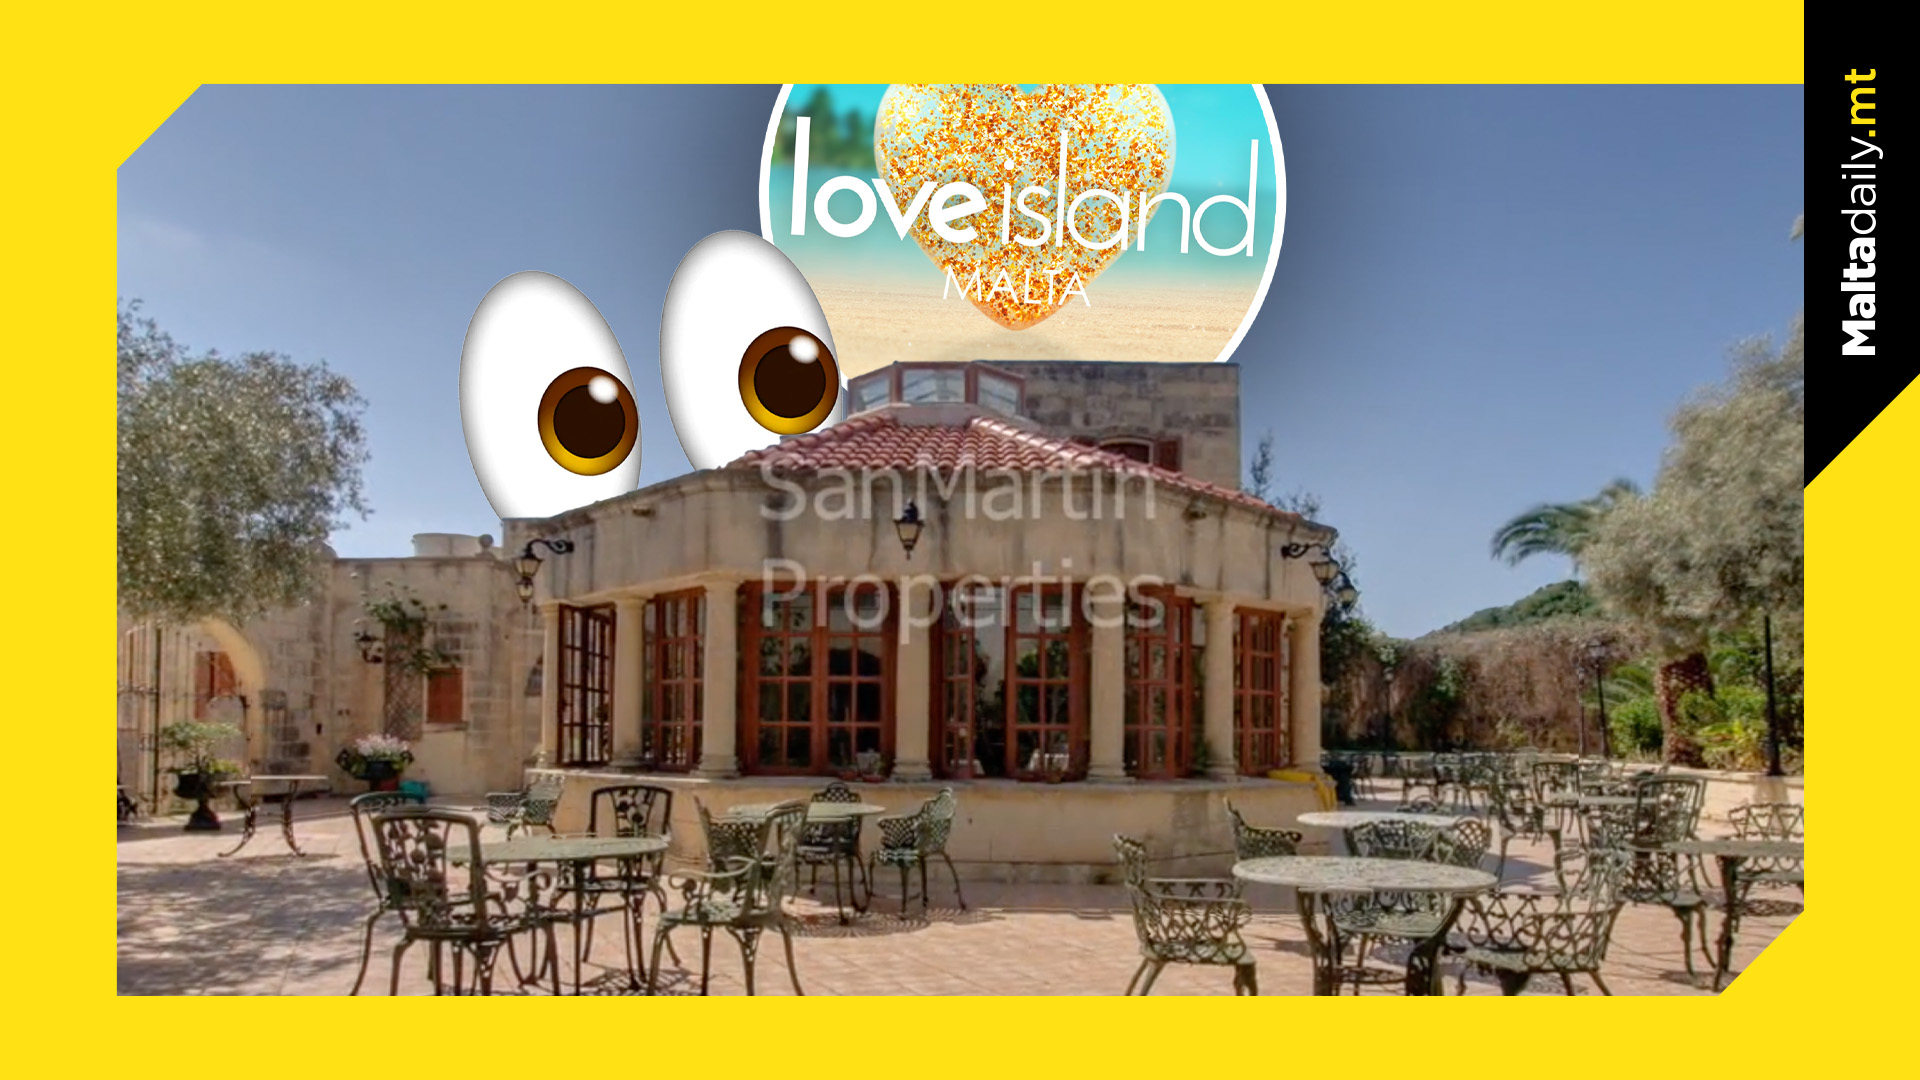 Here's what the Love Island Villa looked like before the show